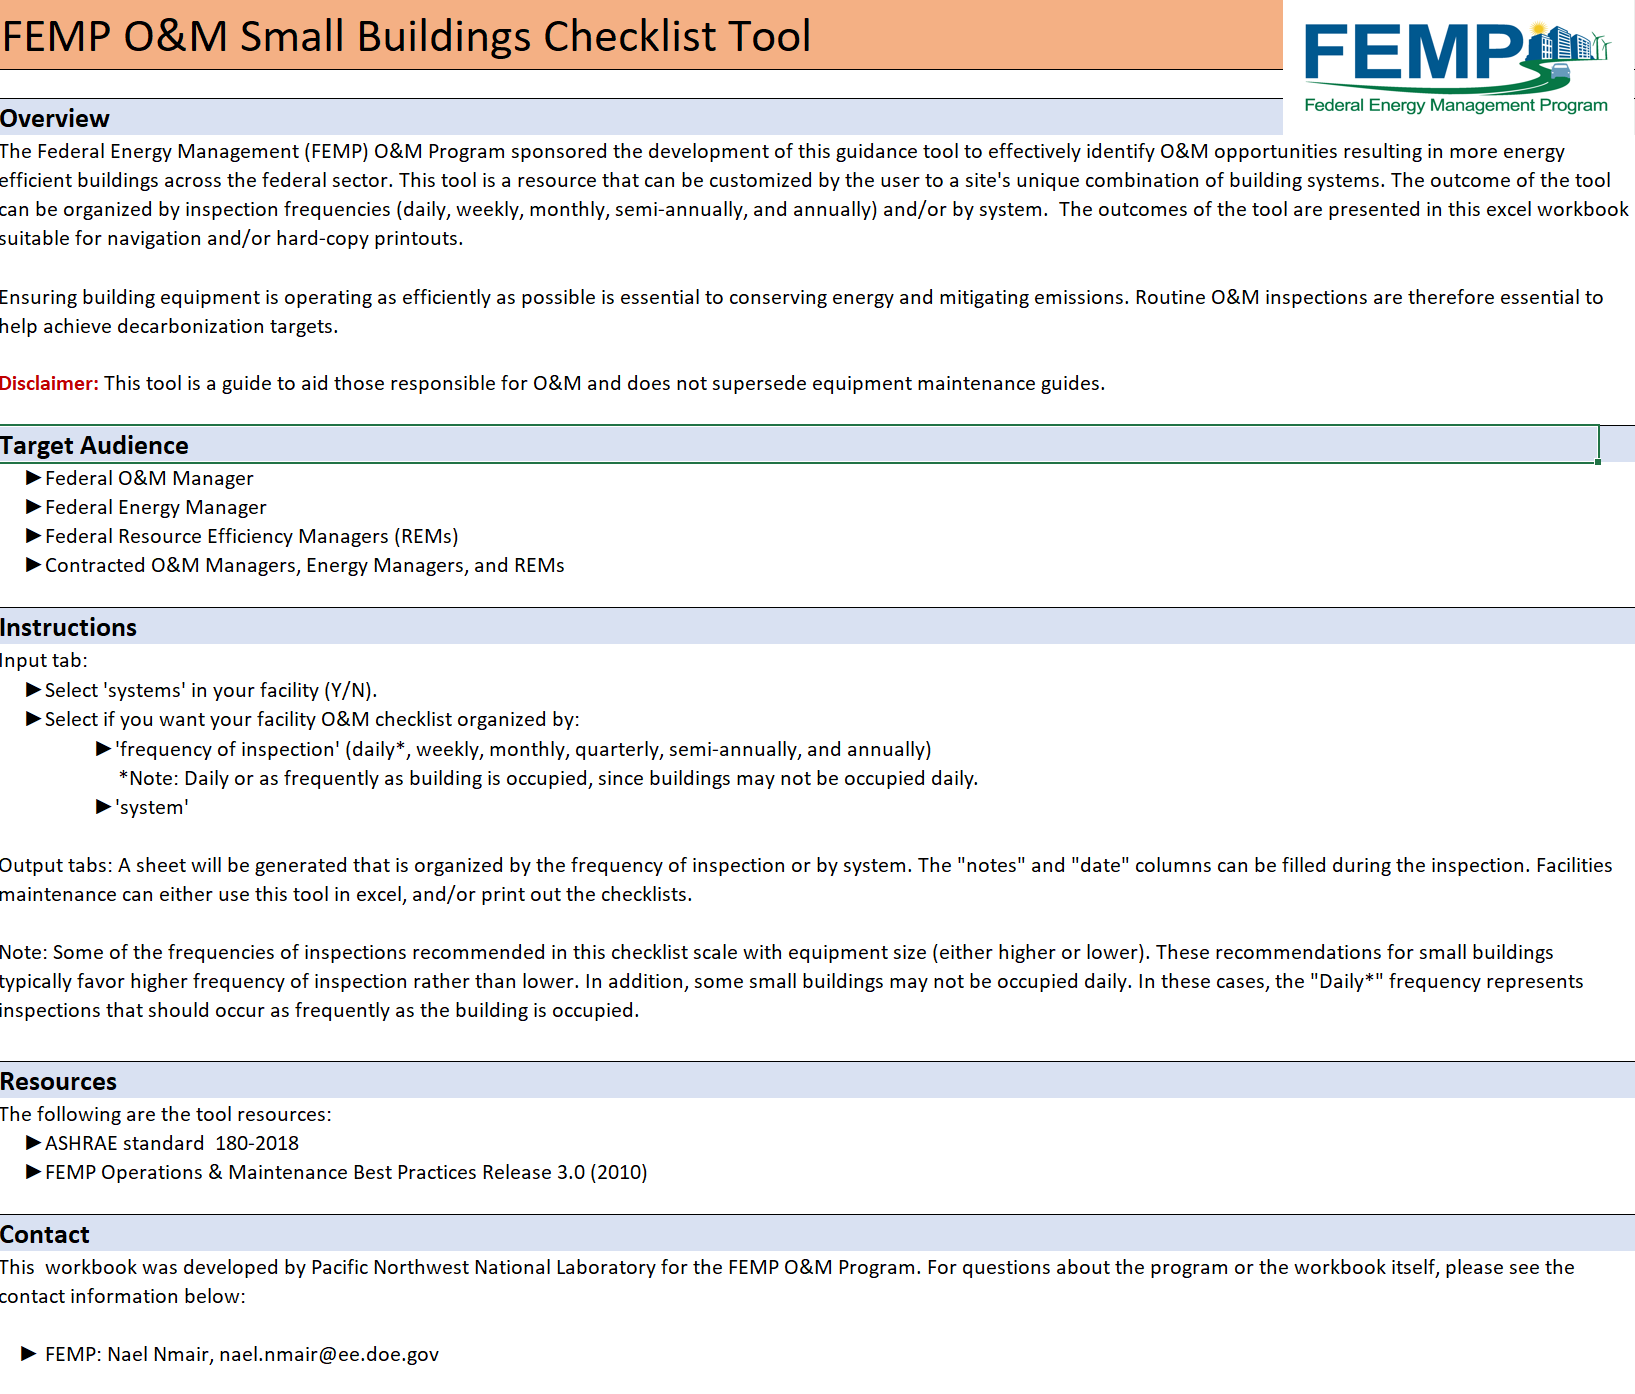 Sample of the tool with heading "FEMP O&M small buildings checklist tool"